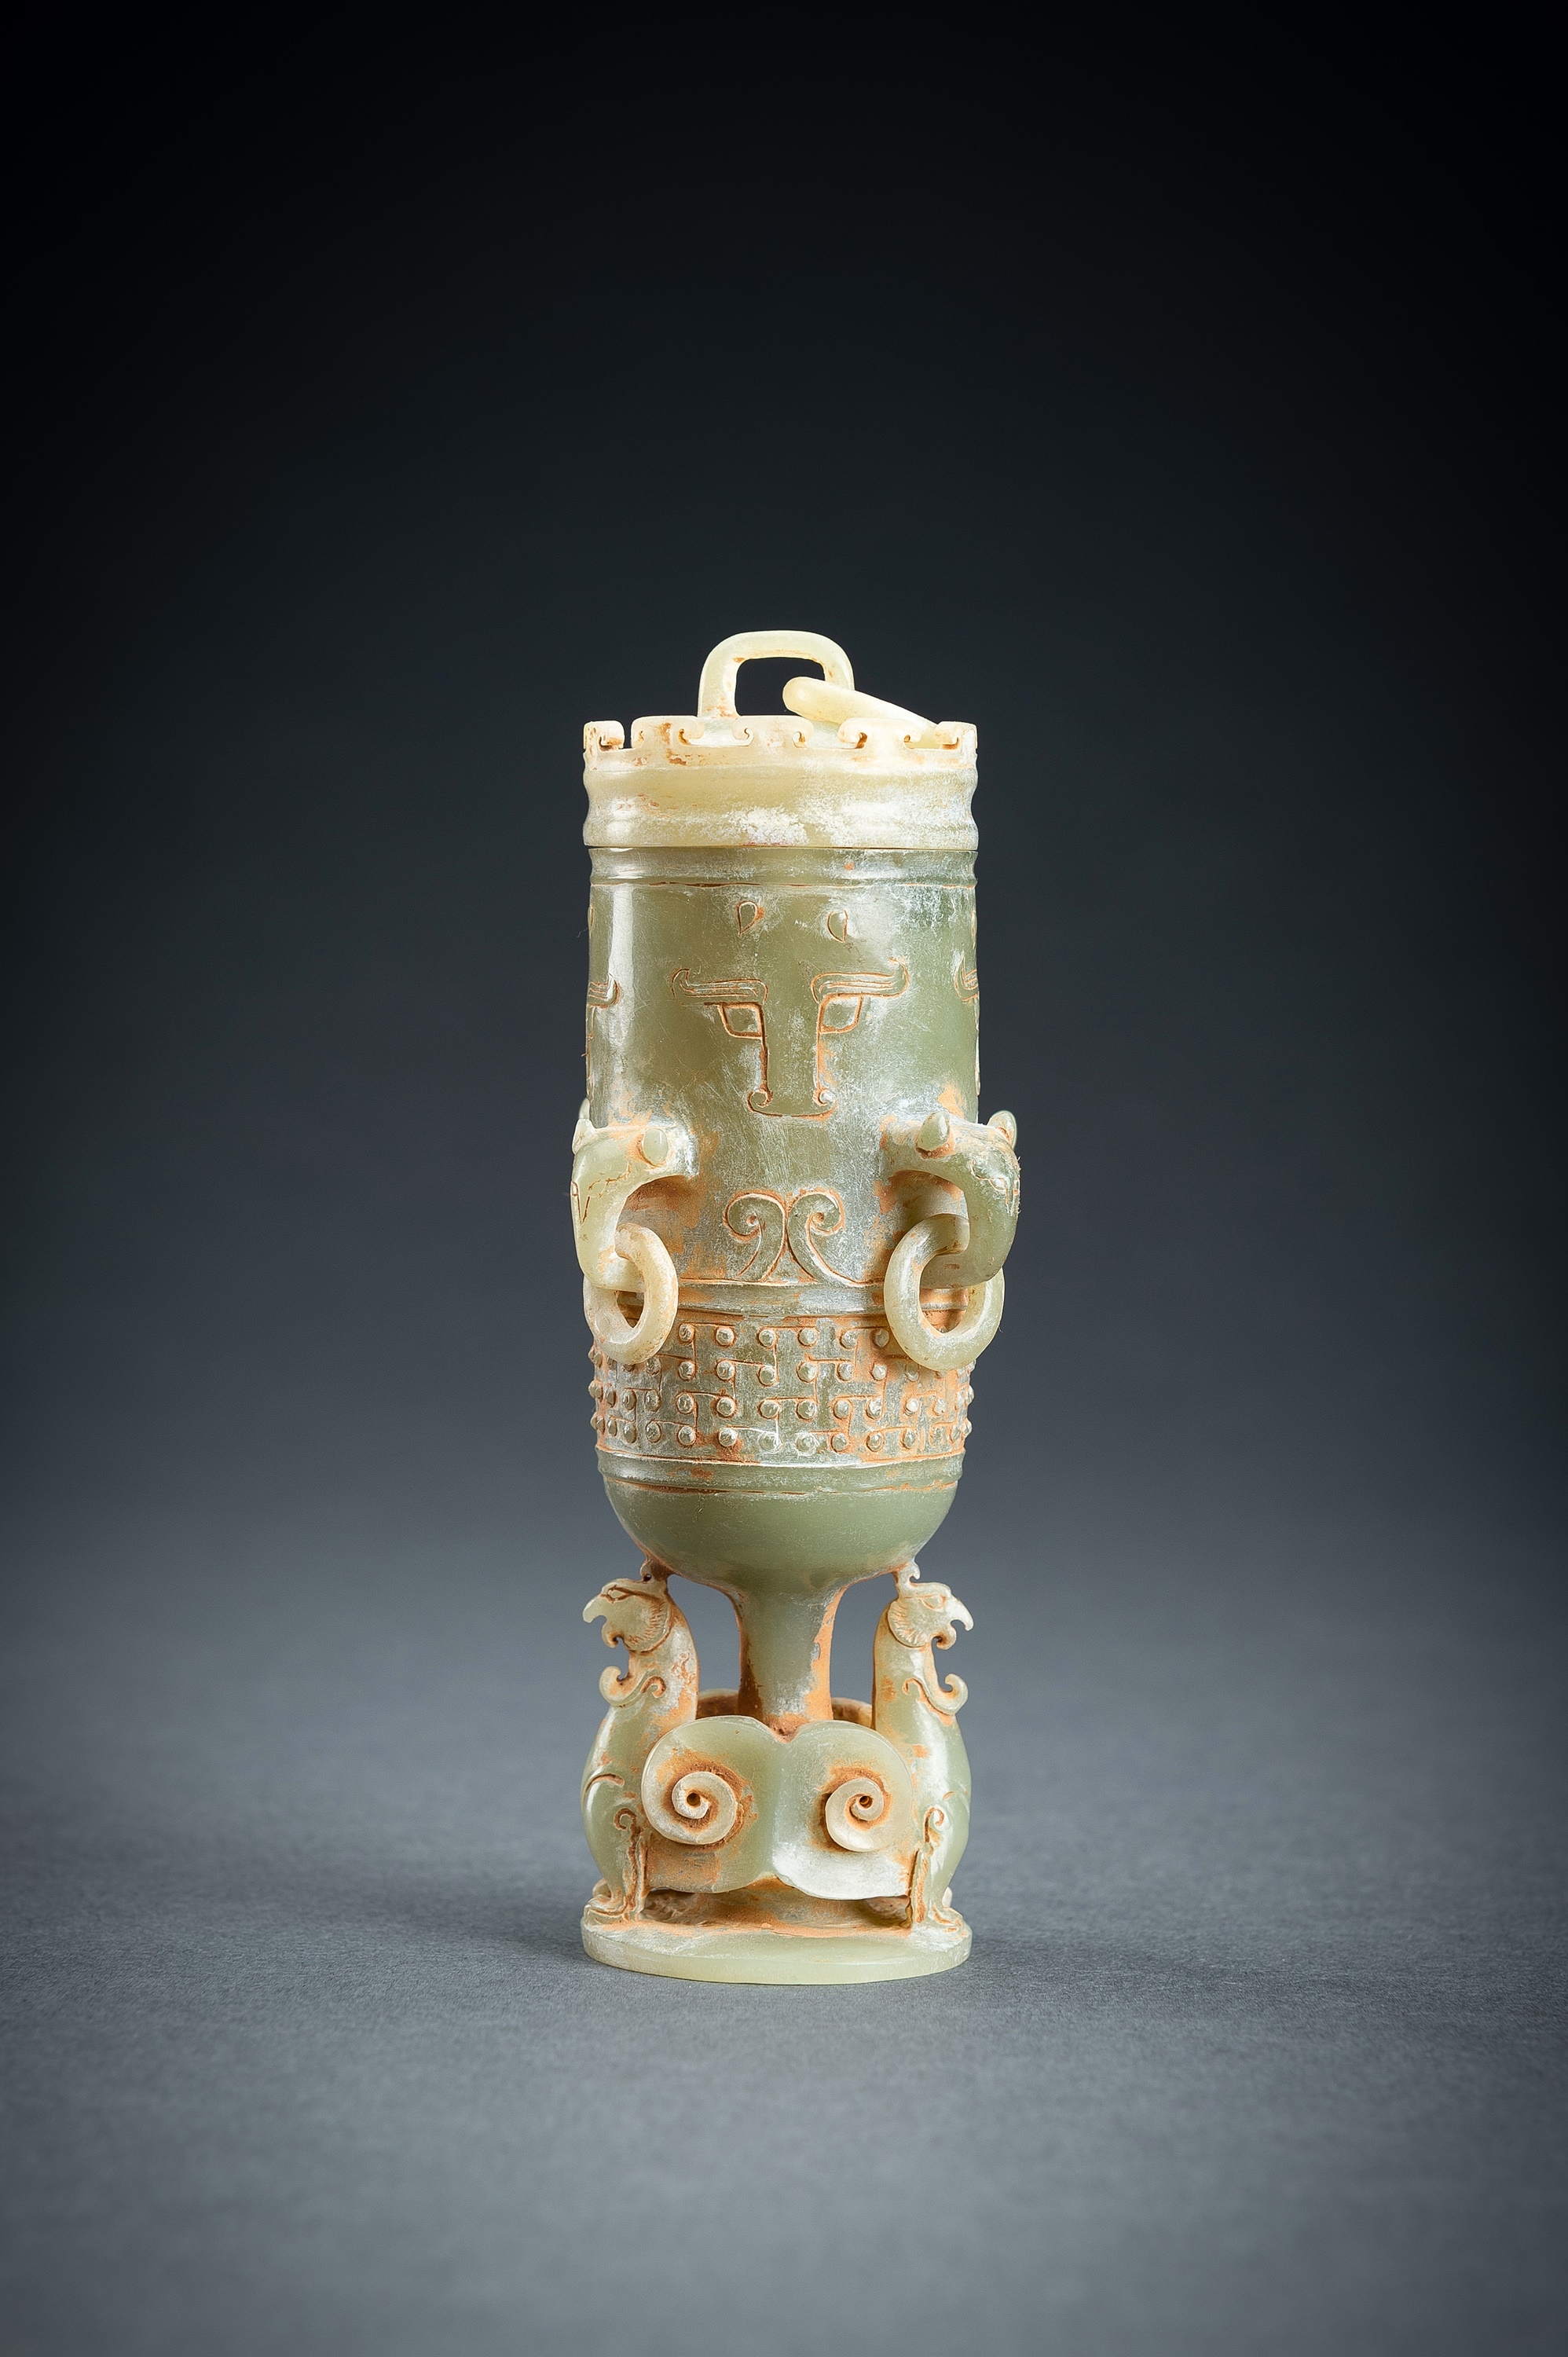 Artwork by Han Dynasty, A SMALL ARCHAISTIC CELADON JADE VASE AND COVER, Made of translucent stone